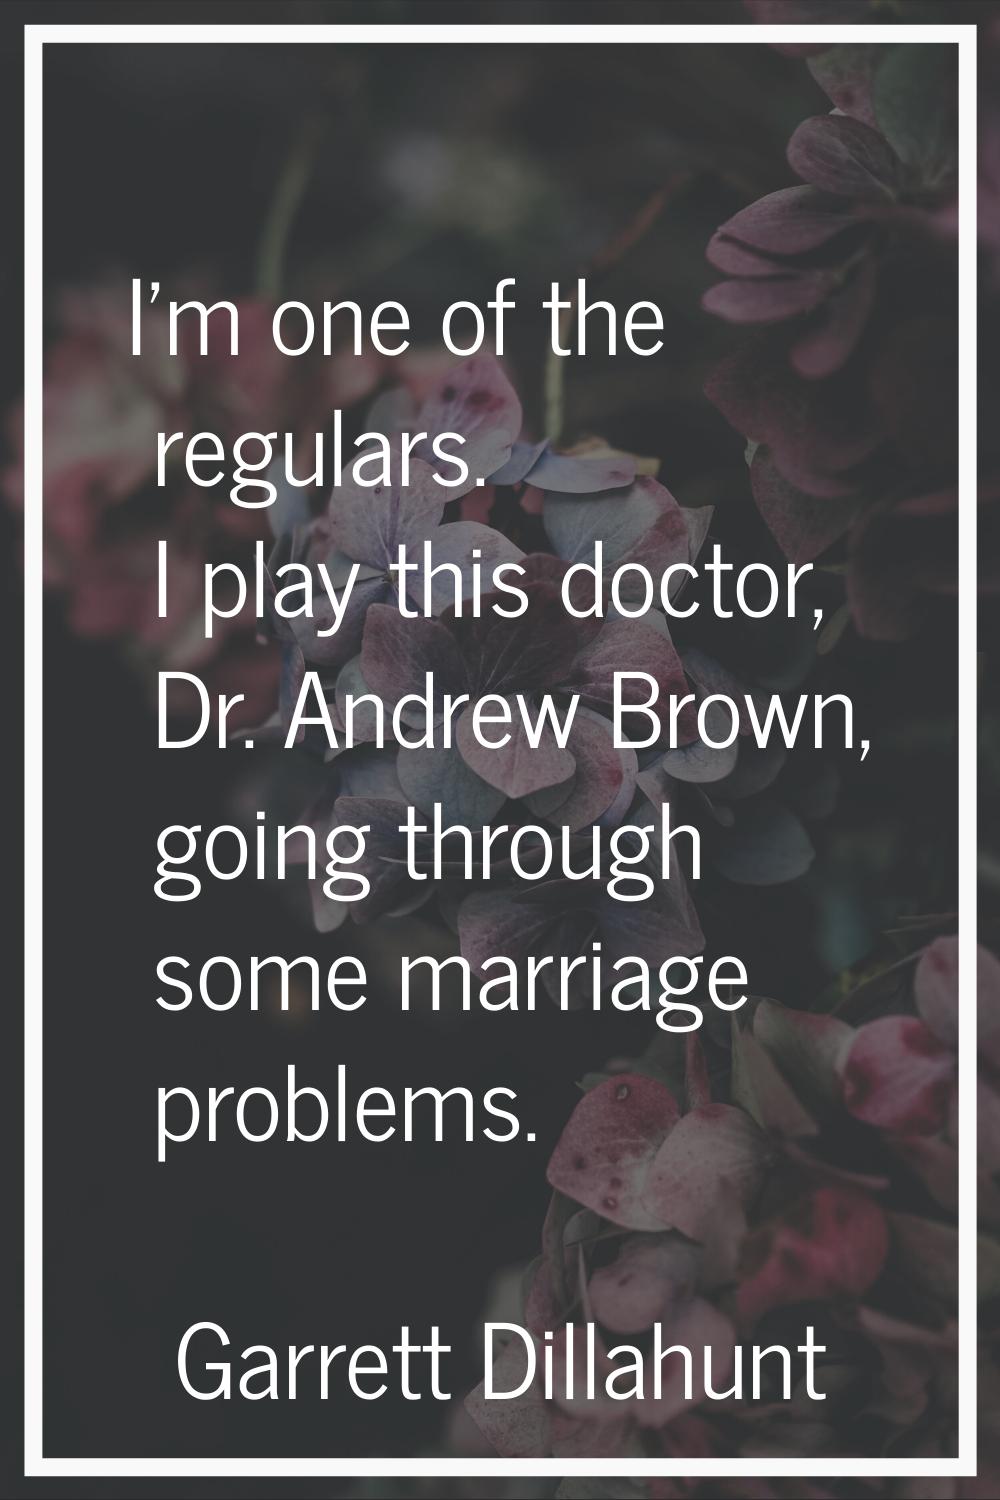 I'm one of the regulars. I play this doctor, Dr. Andrew Brown, going through some marriage problems